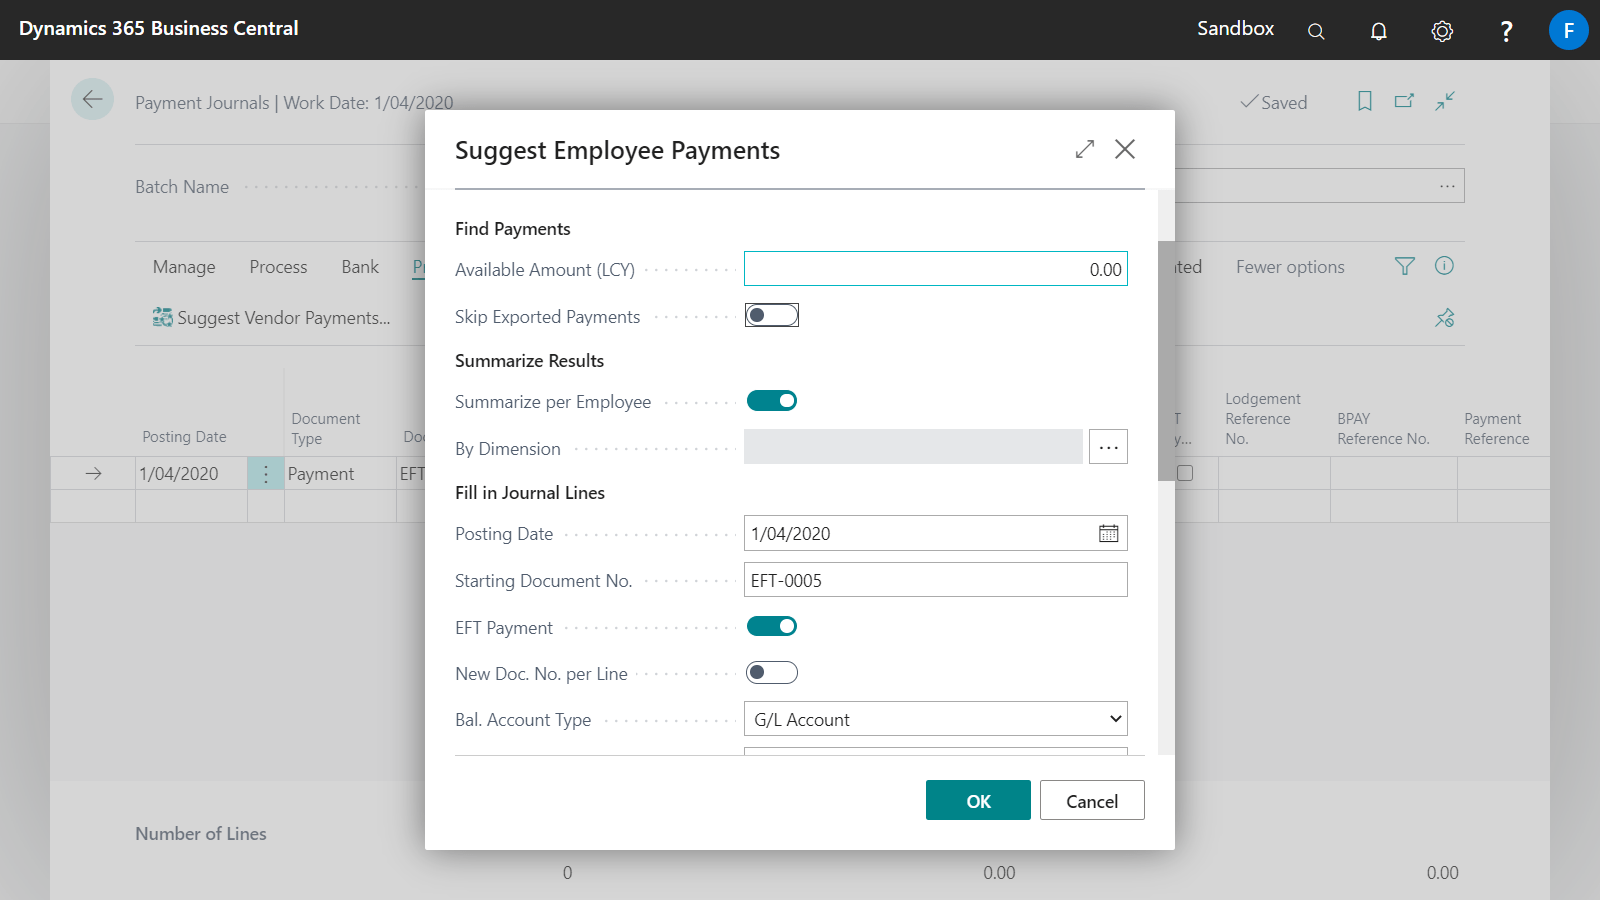 Suggest_Employee_Payments.png